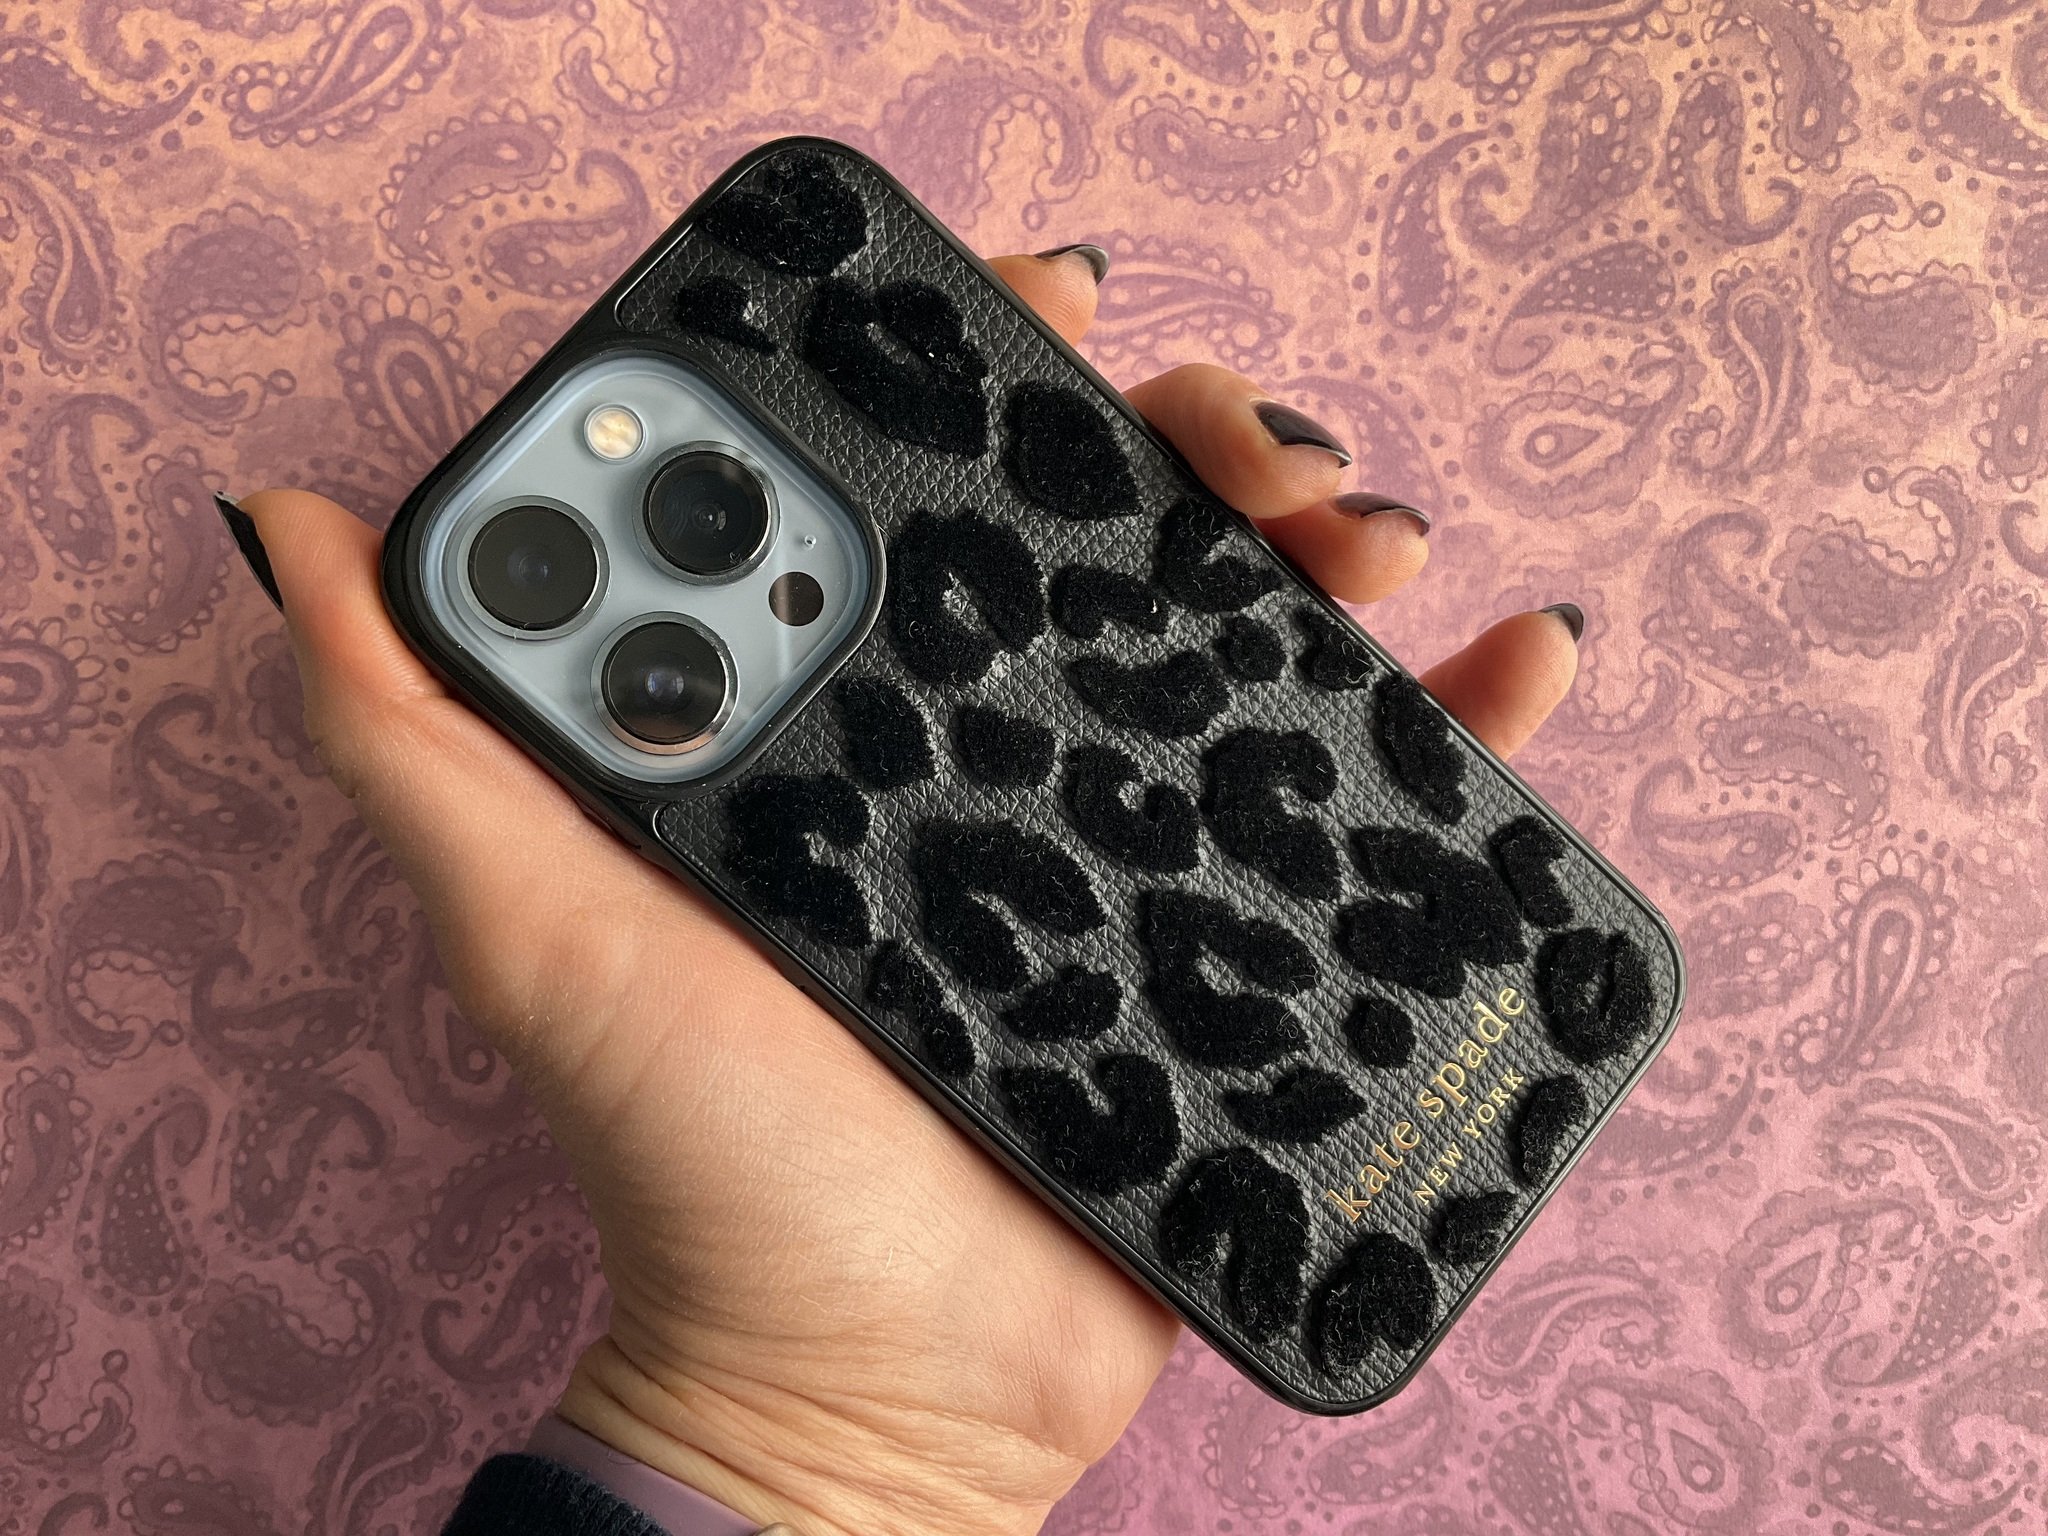 Kate Spade New York Wrap Case For Iphone Leopard Flocked Black Lifestyle In Hand